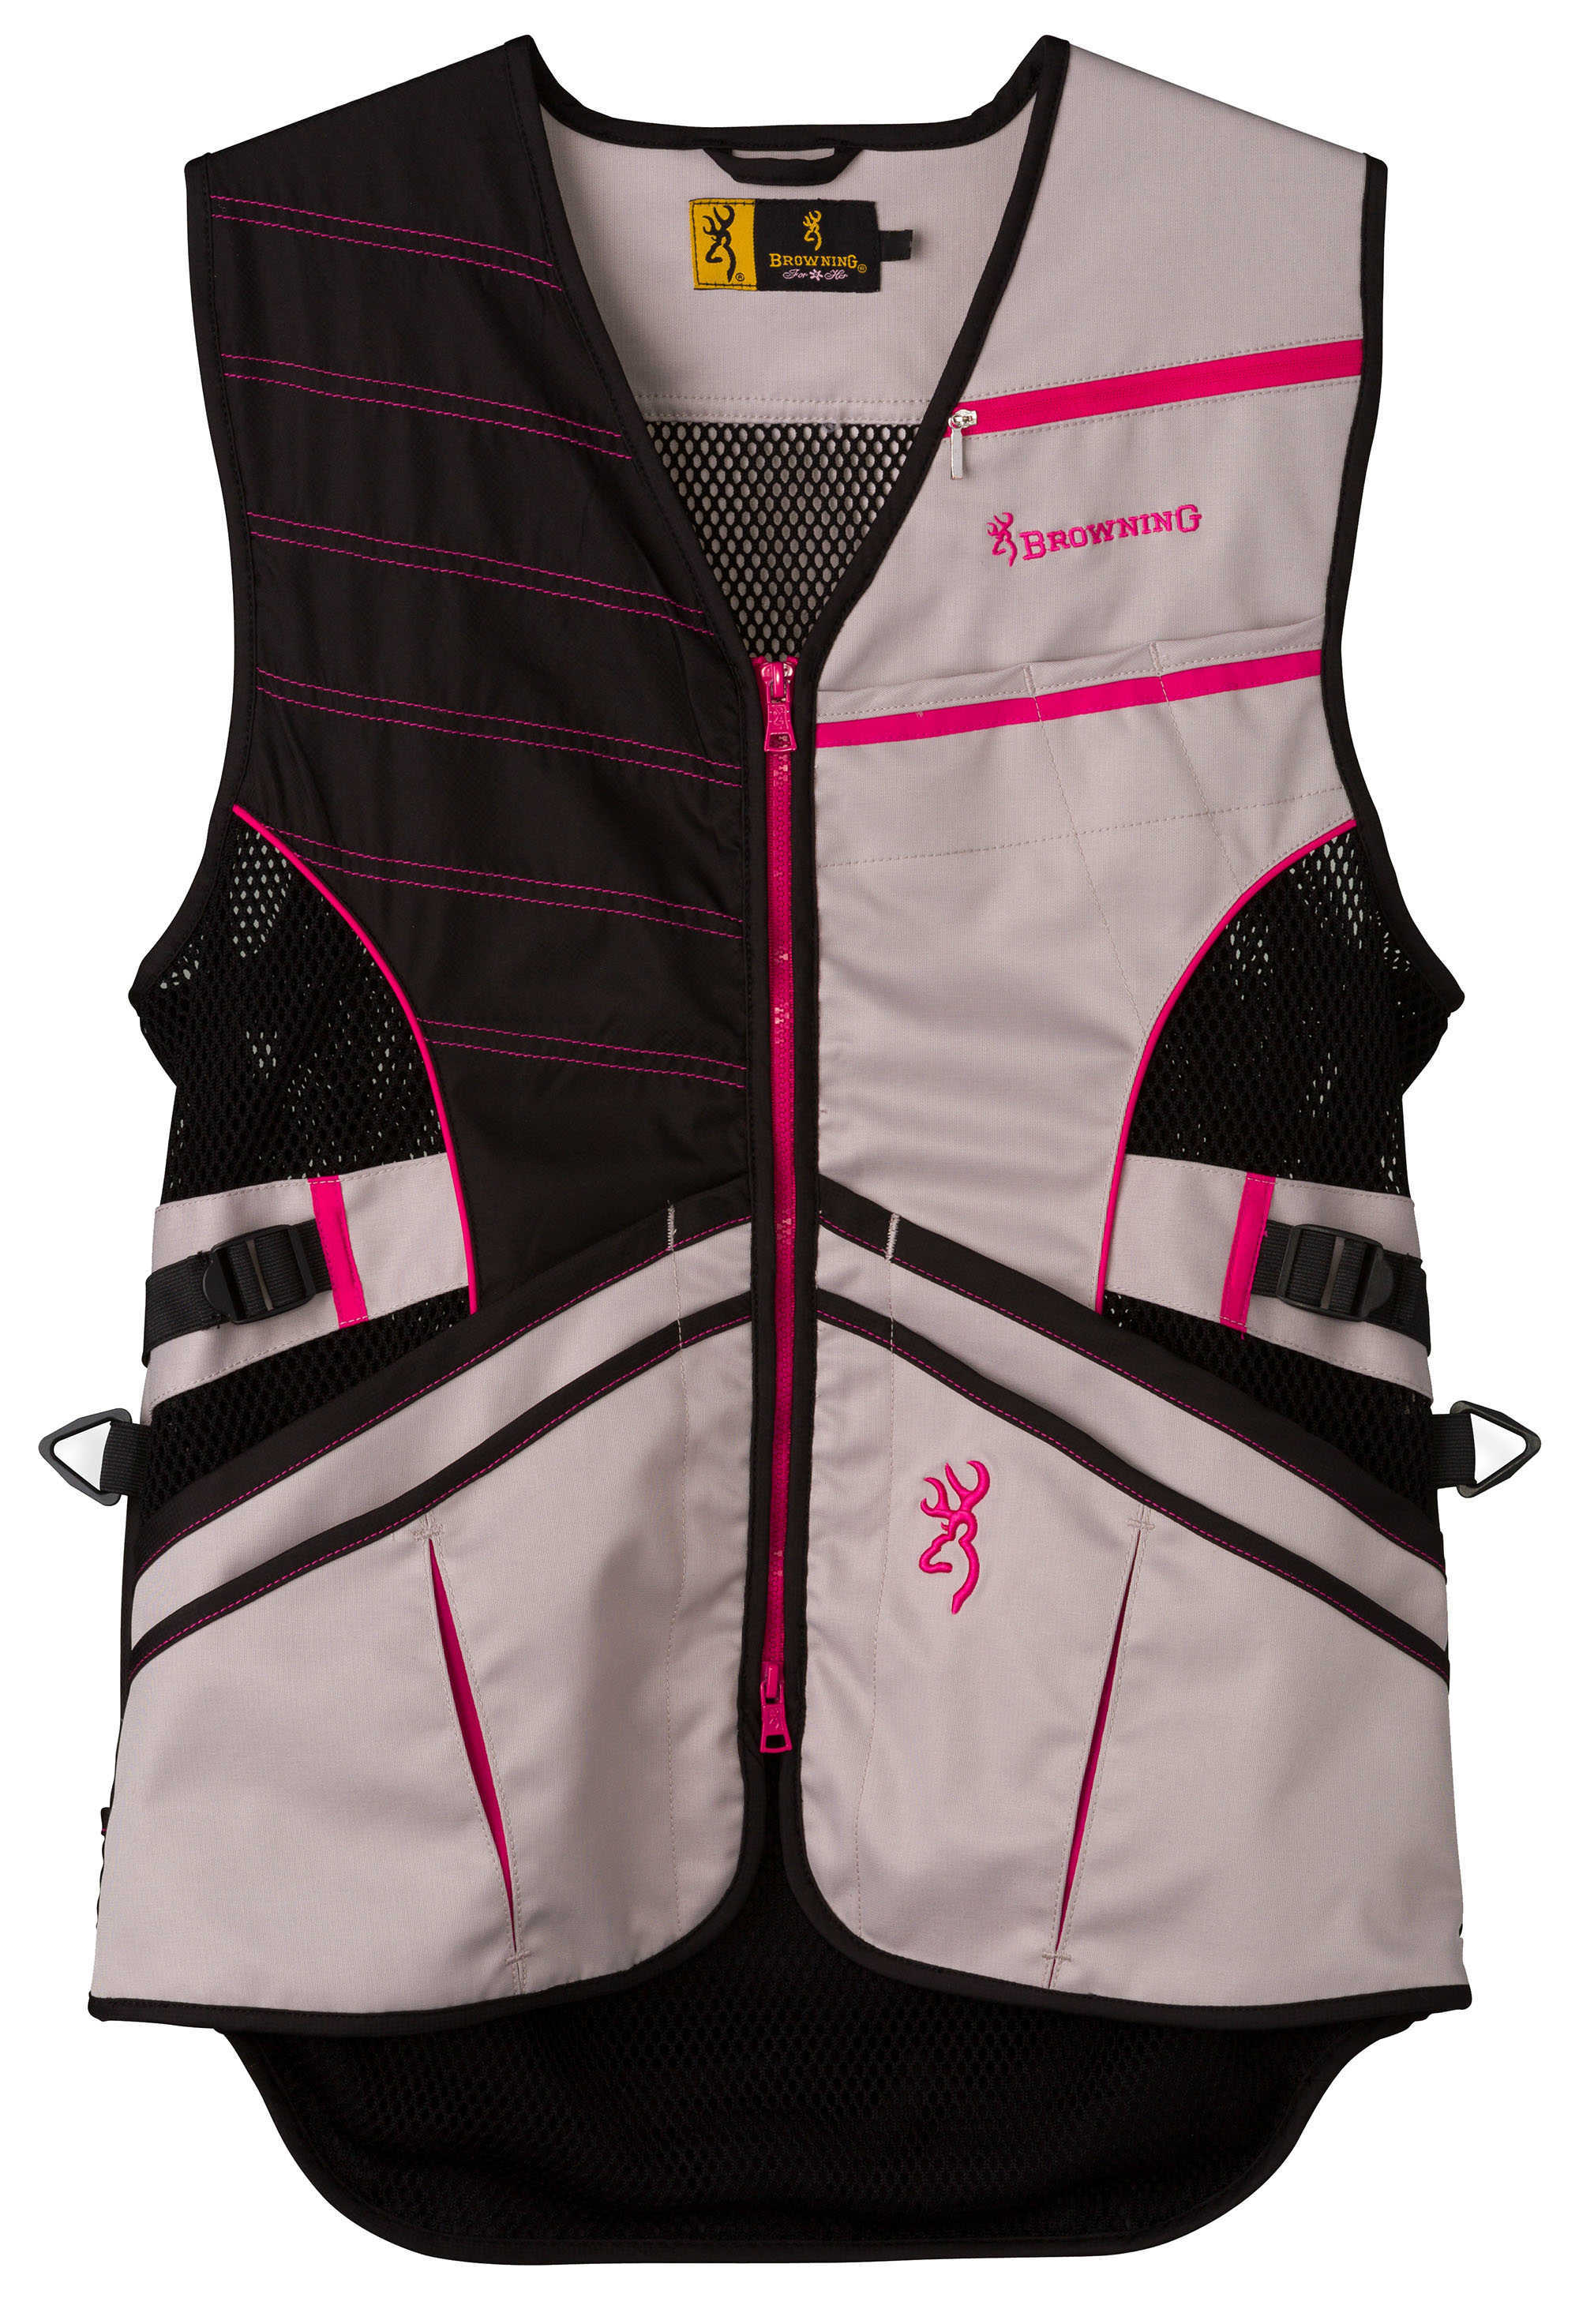 Browning Ace Shooting Vest Hot Pink, Medium Md: 3050727702